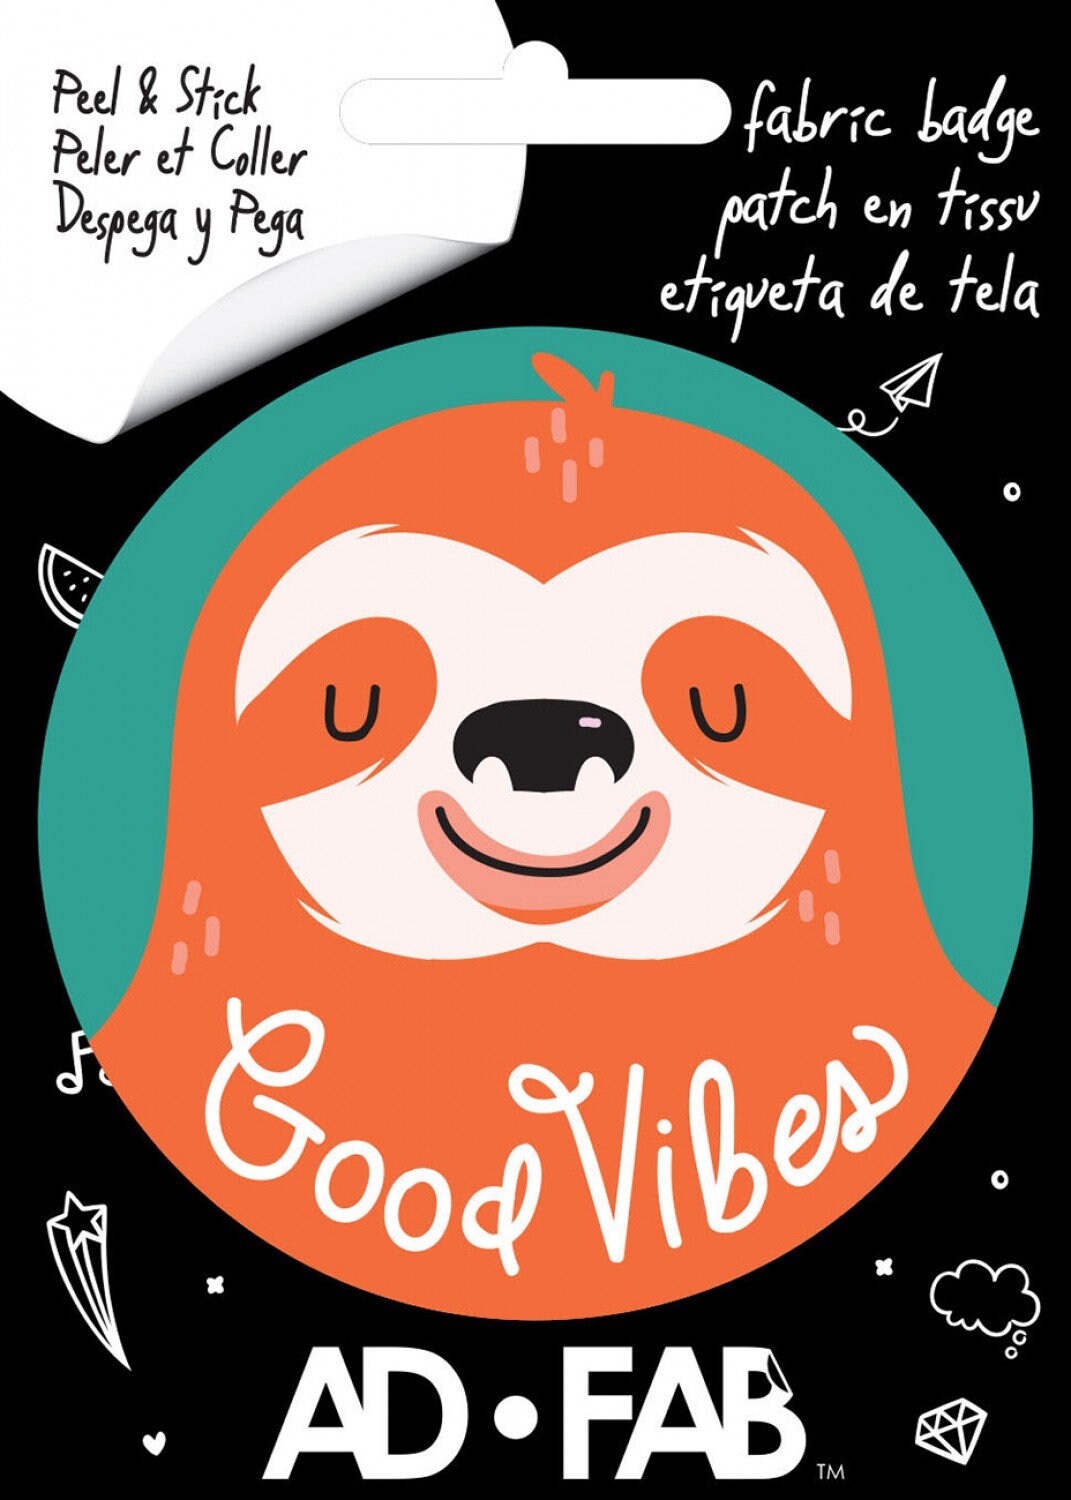 Ad Fab Adhesive Badge Gotta Have Tween Neutral Good Vibes Adhesive Fabric 3" Badge 21182403X 100% Polyester